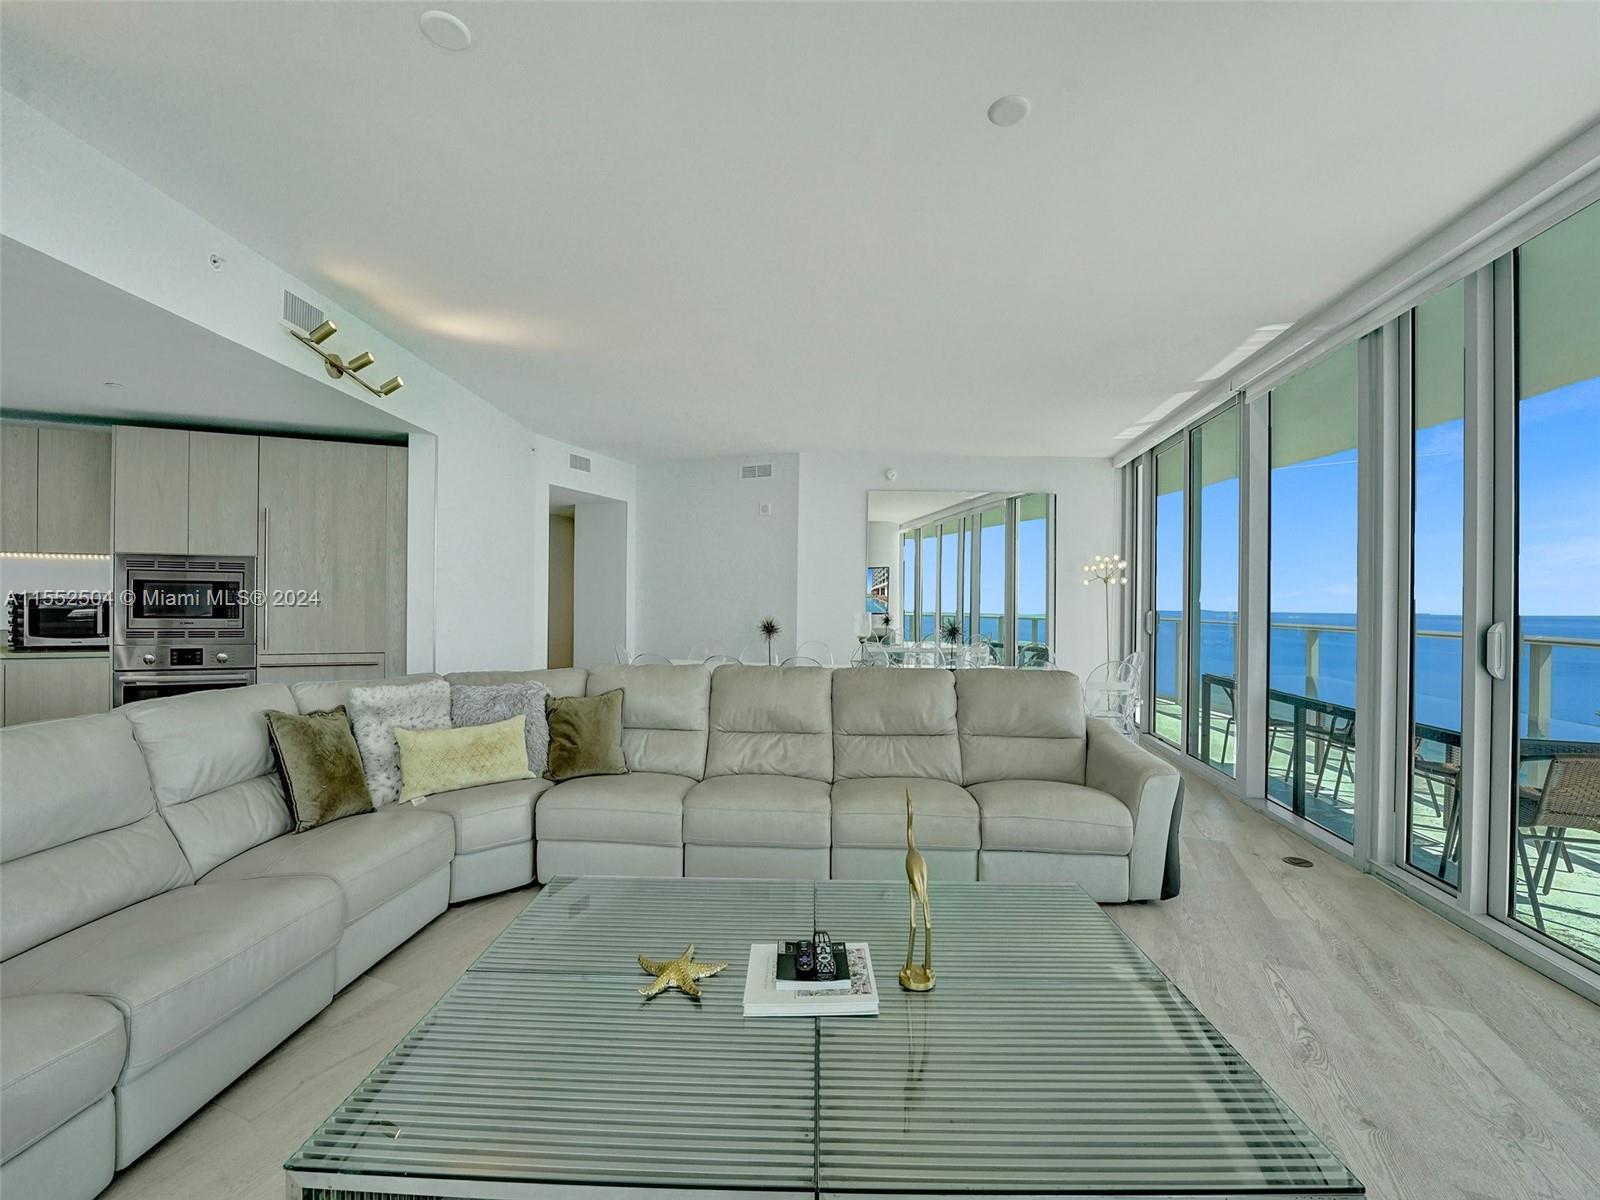 Photo of 4111 S Ocean Dr #3501&3502 in Hollywood, FL